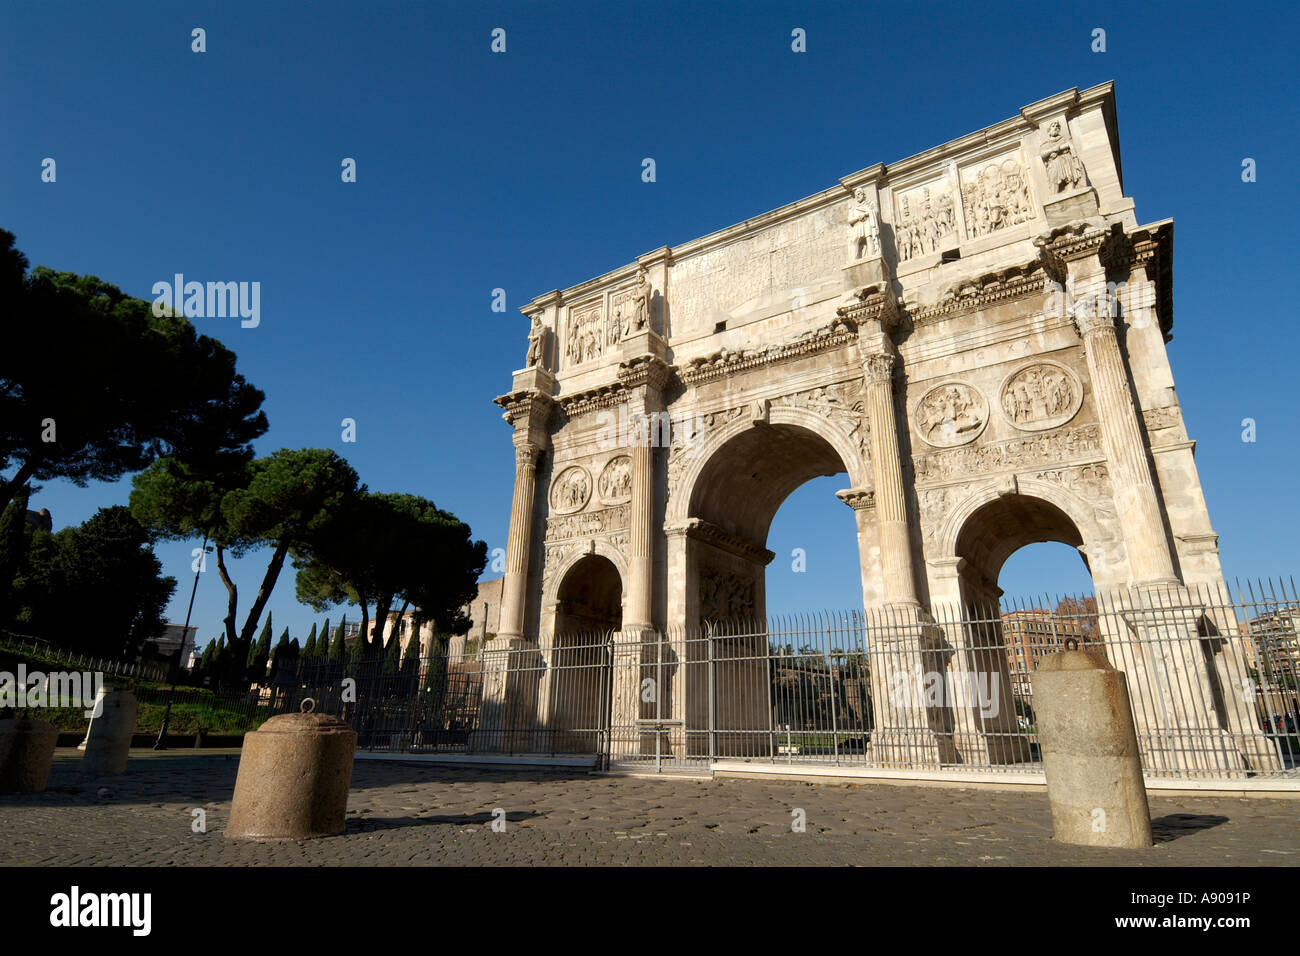 Rome Italy The triumphal Arch of Constantine on Piazza del Colosseo Stock Photo